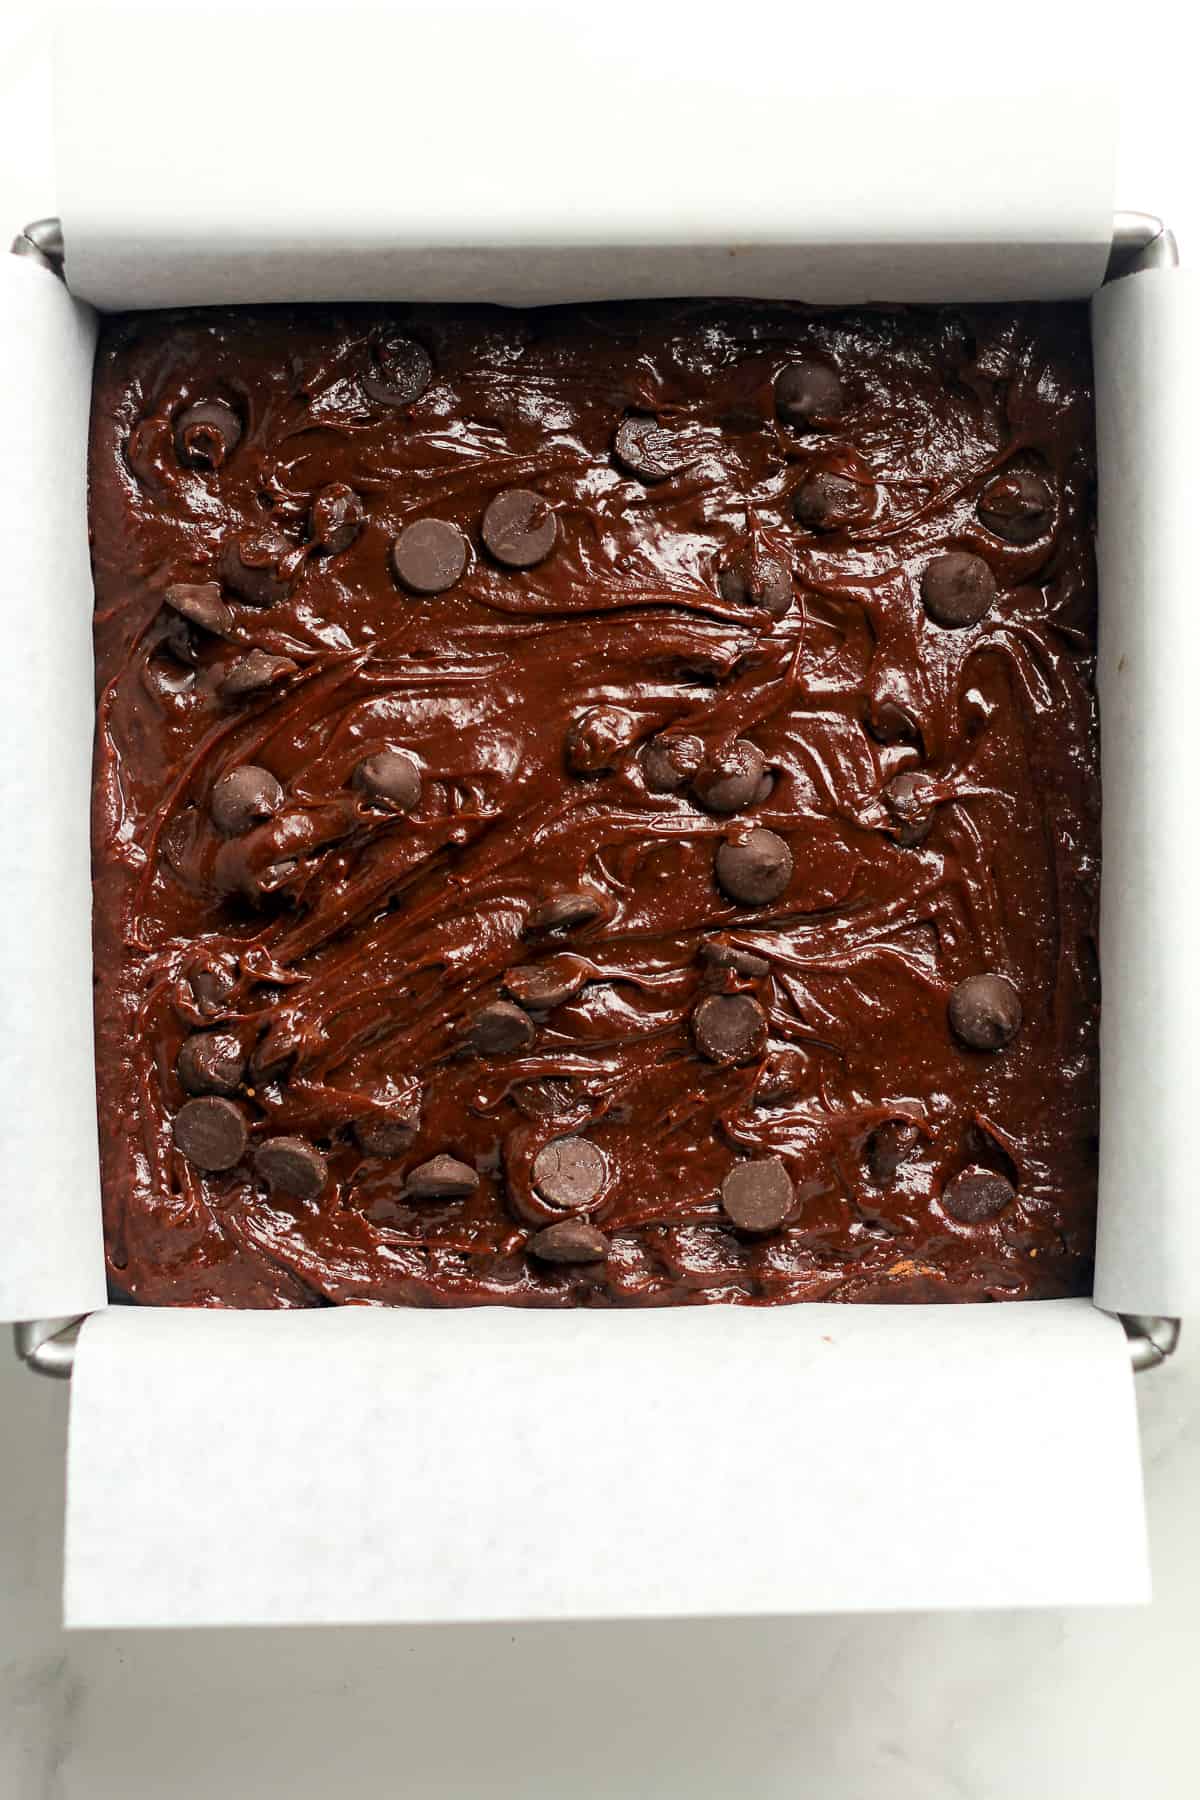 The brownie batter in a square pan with parchment paper.